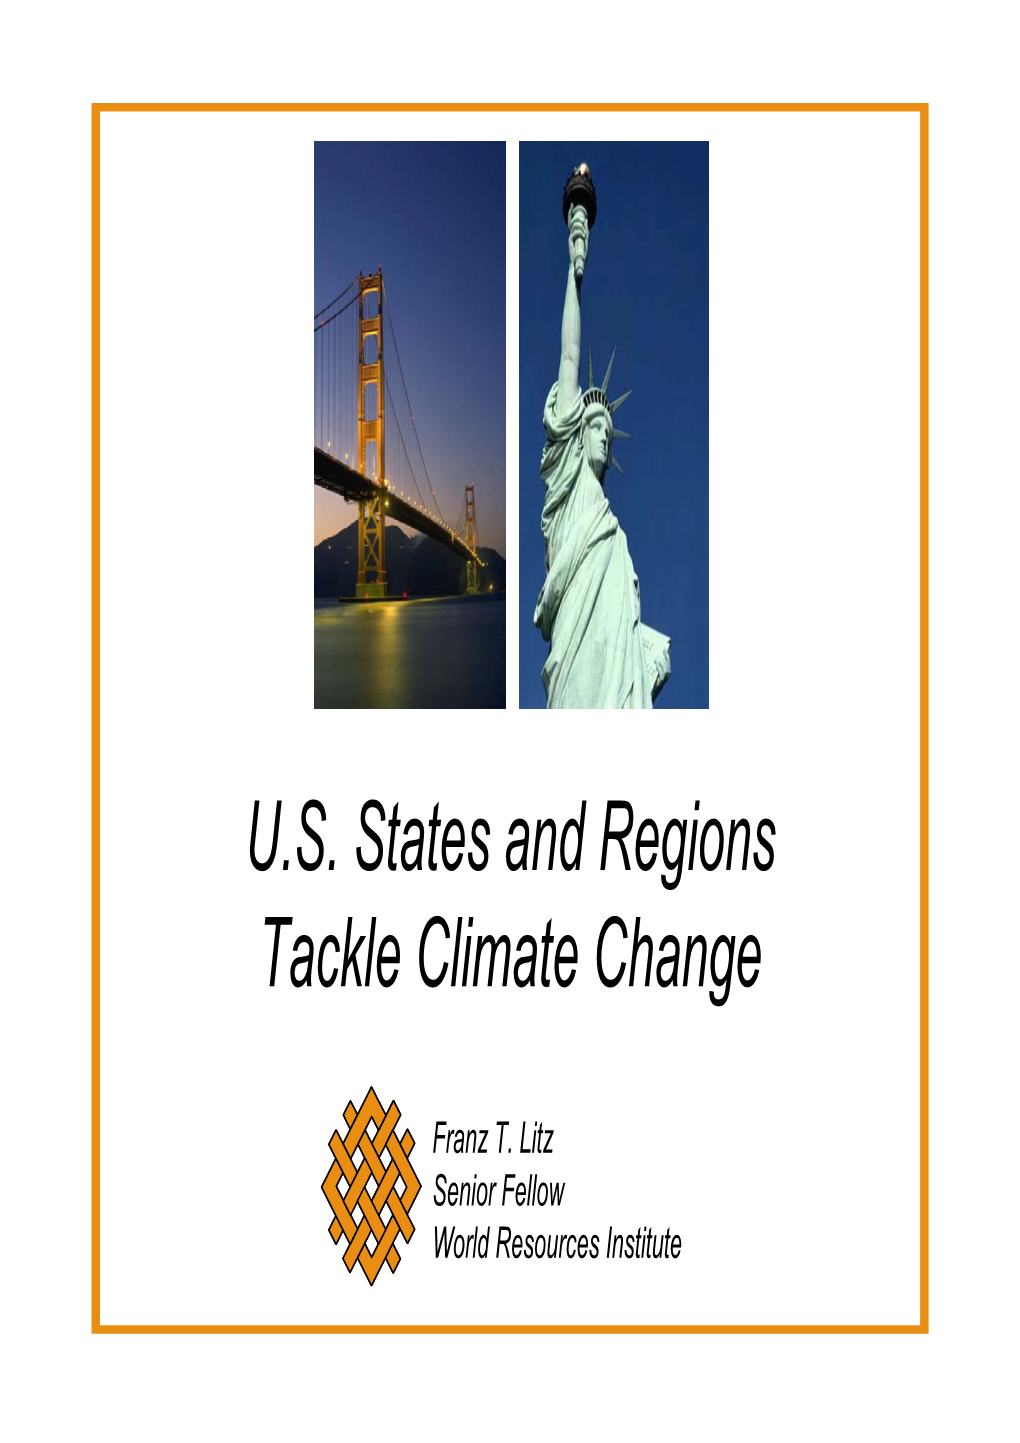 U.S. States and Regions Tackle Climate Change